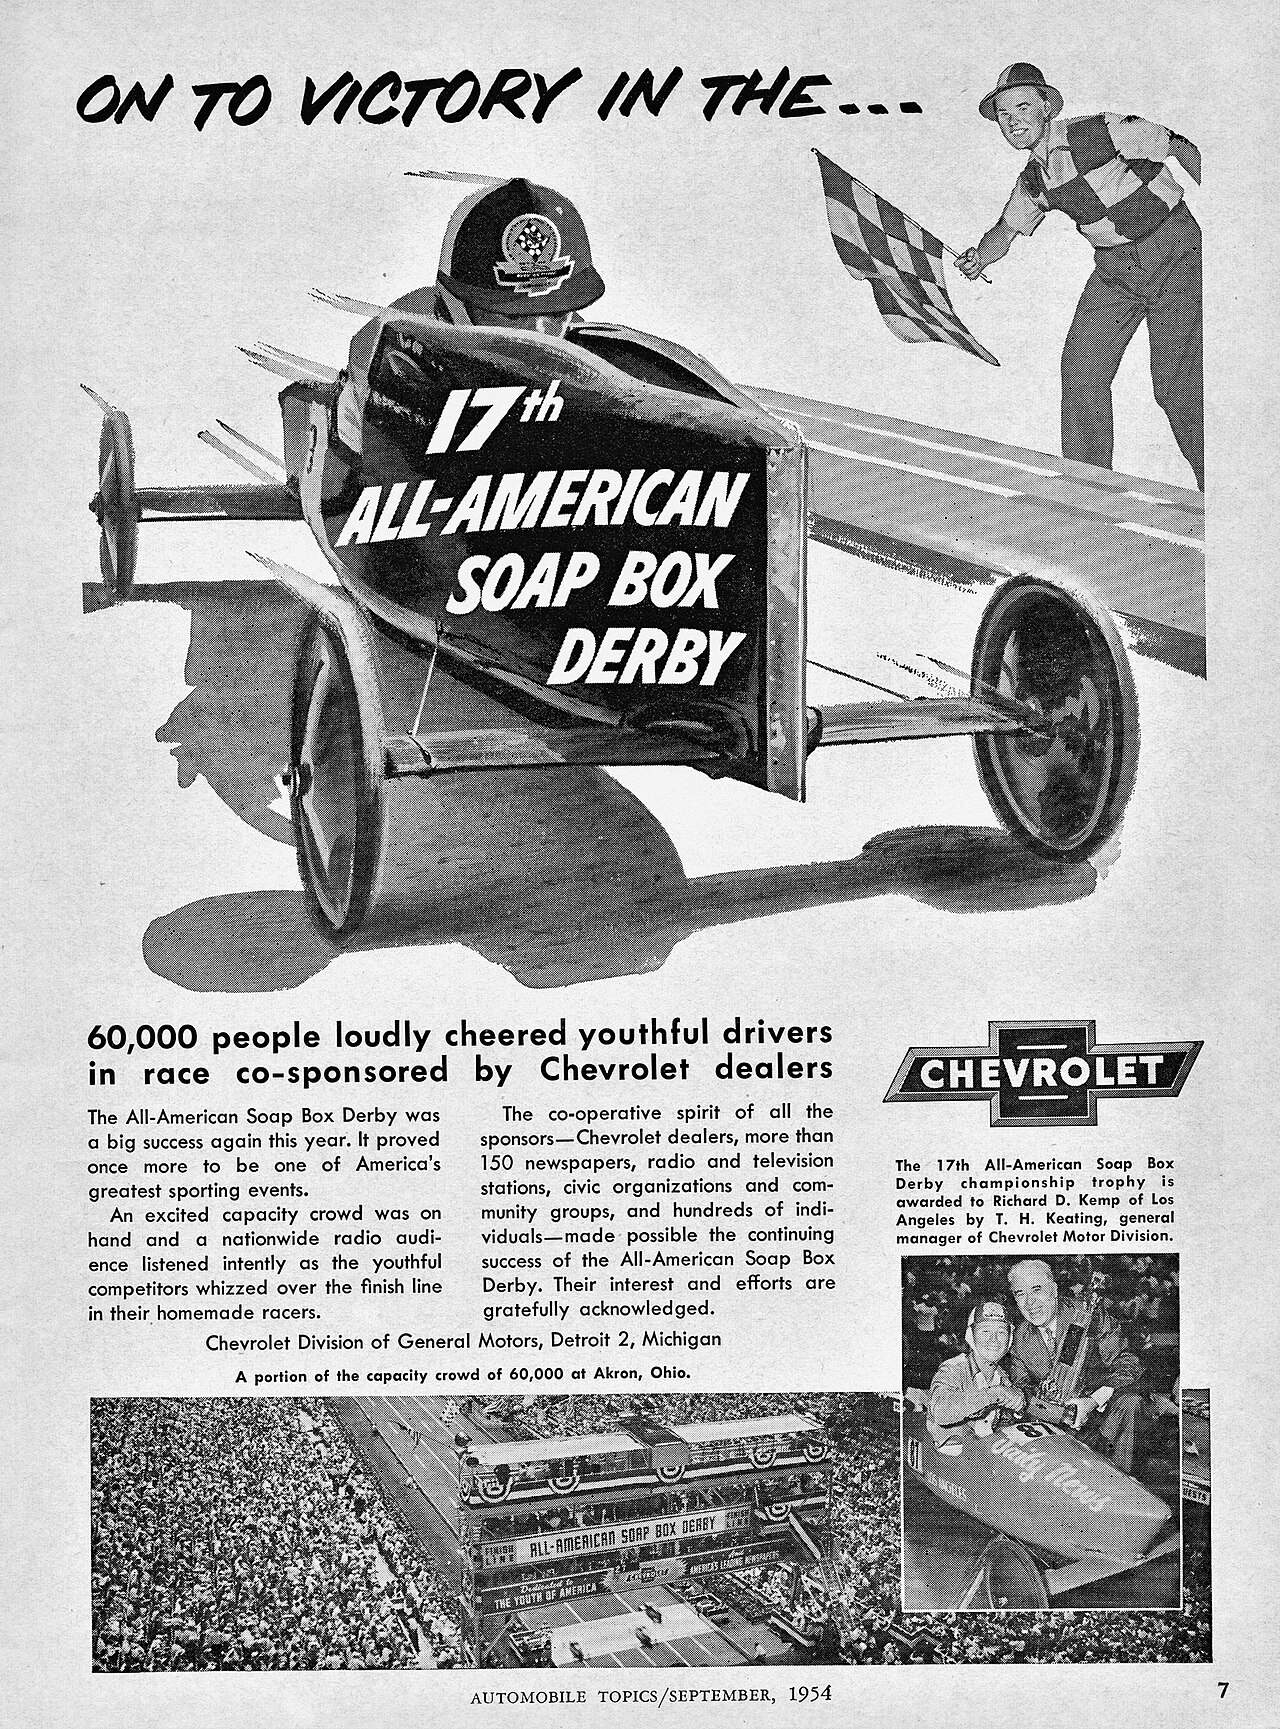 1954 magazine advertisement by Chevrolet Motor Division for the Soap Box Derby 